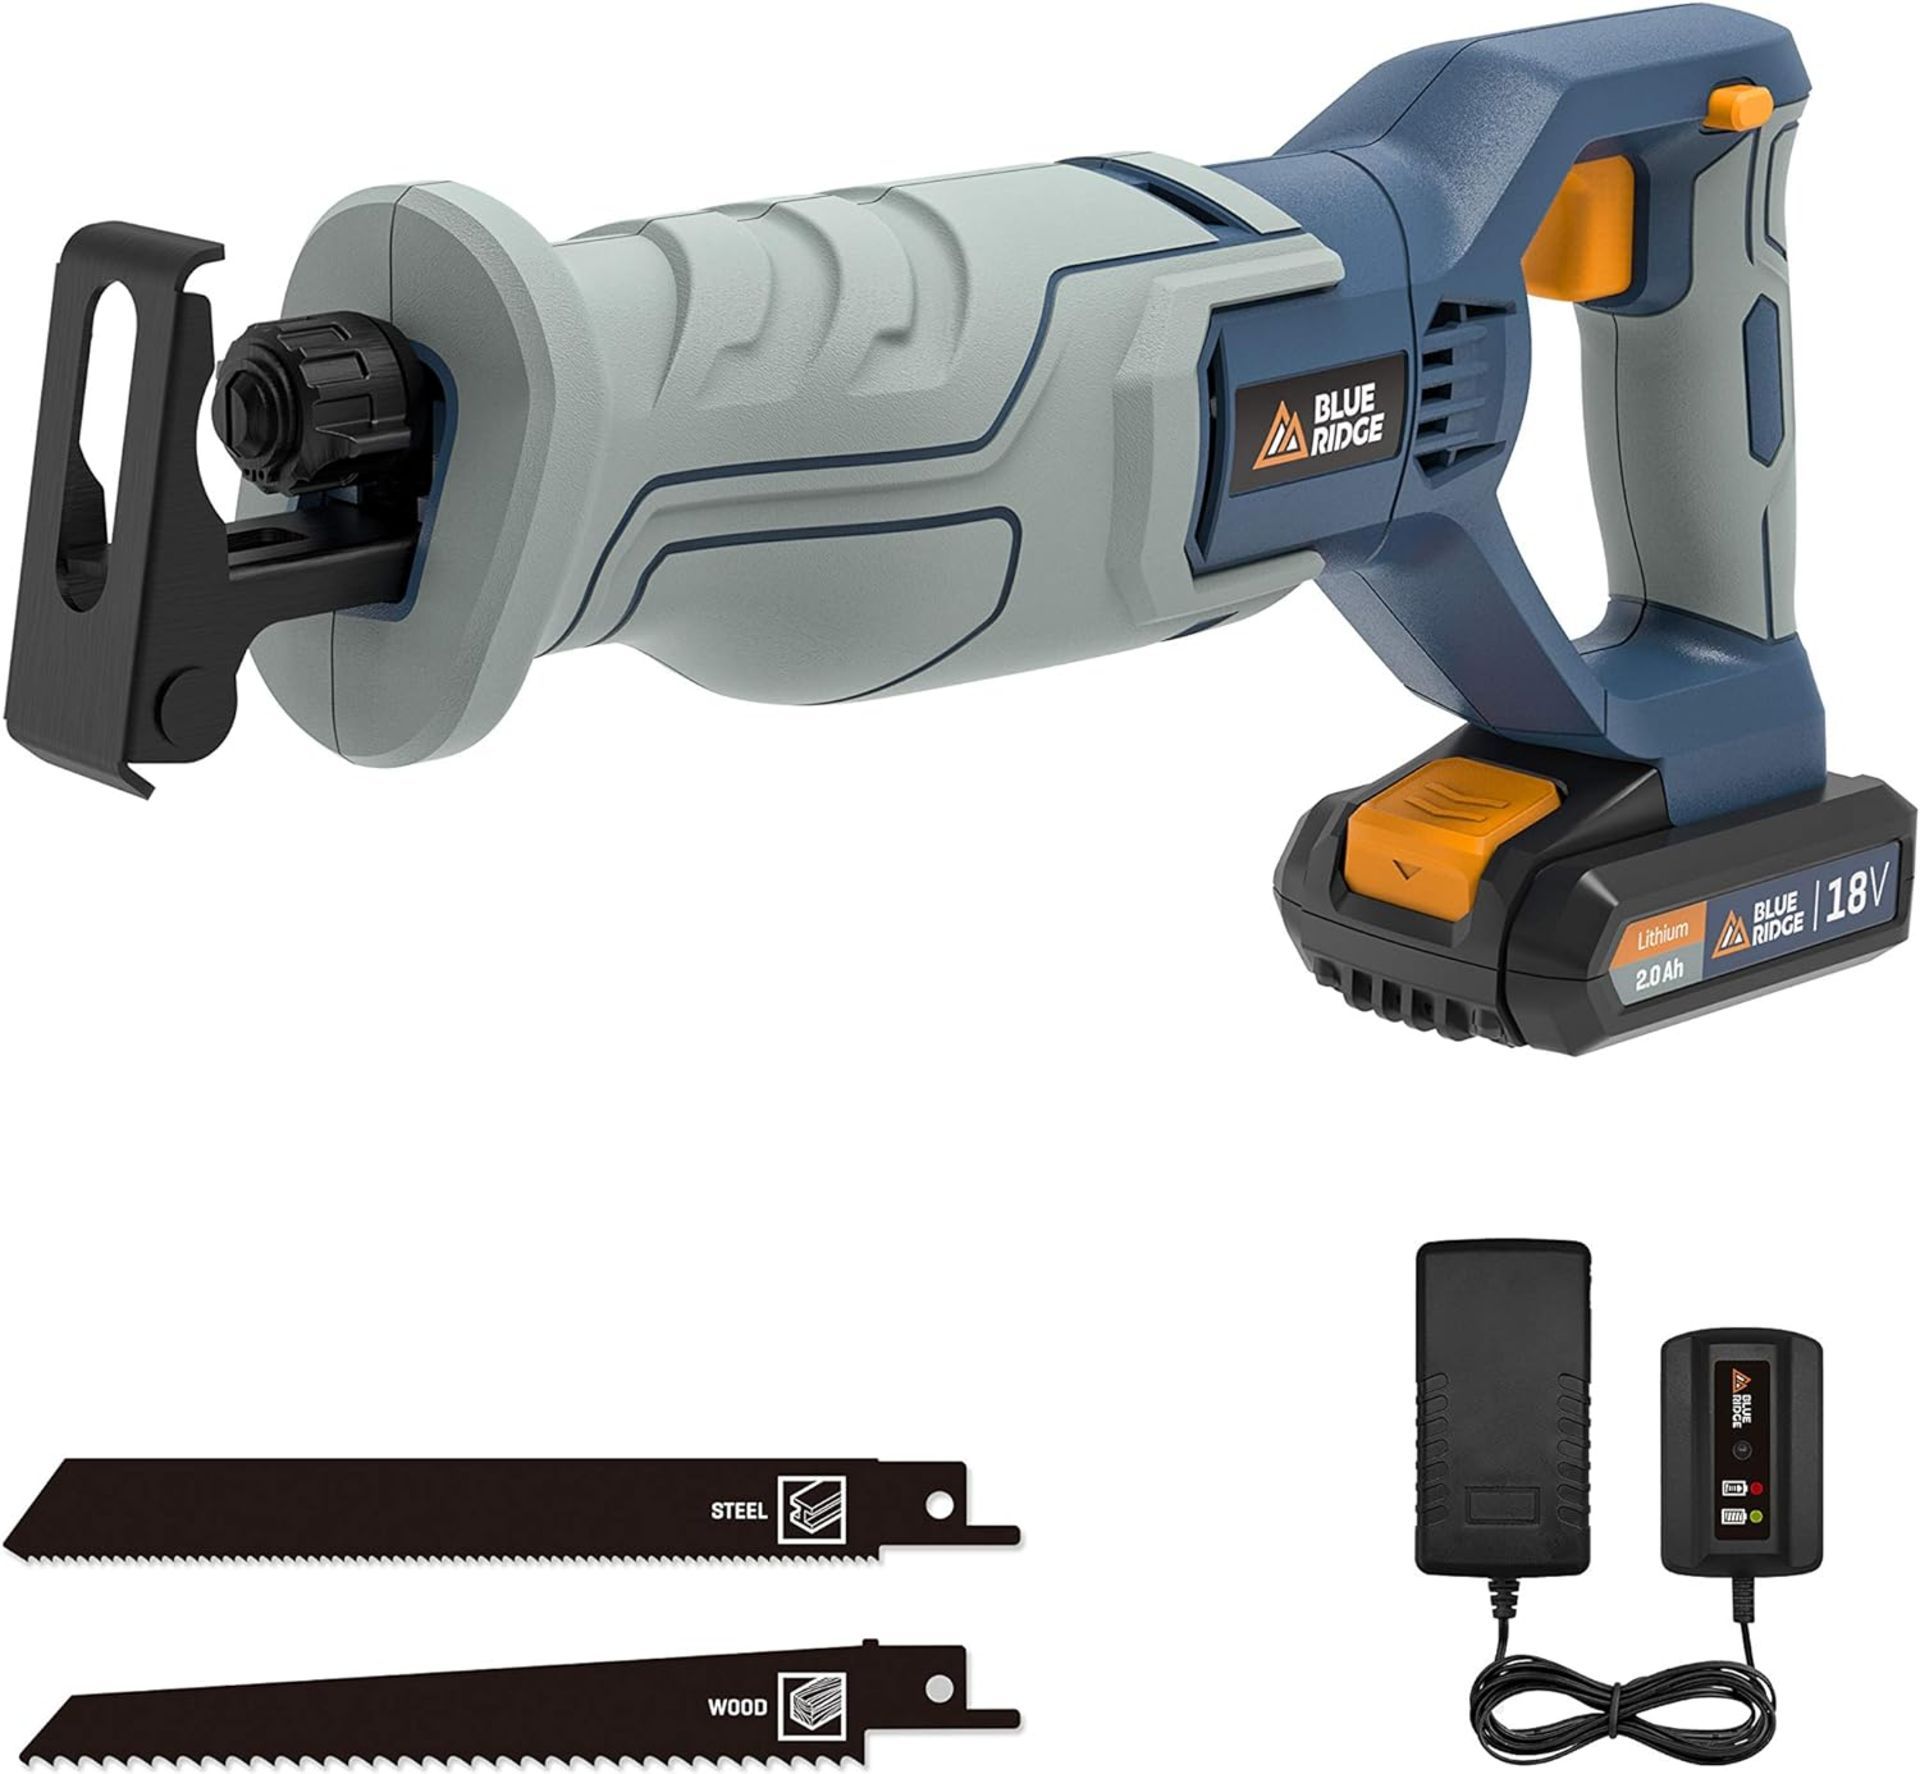 3x NEW & BOXED BLUE RIDGE 18V Reciprocating Cordless Sabre Saw with 2.0Ah Battery. RRP £99 EACH. - Image 2 of 8